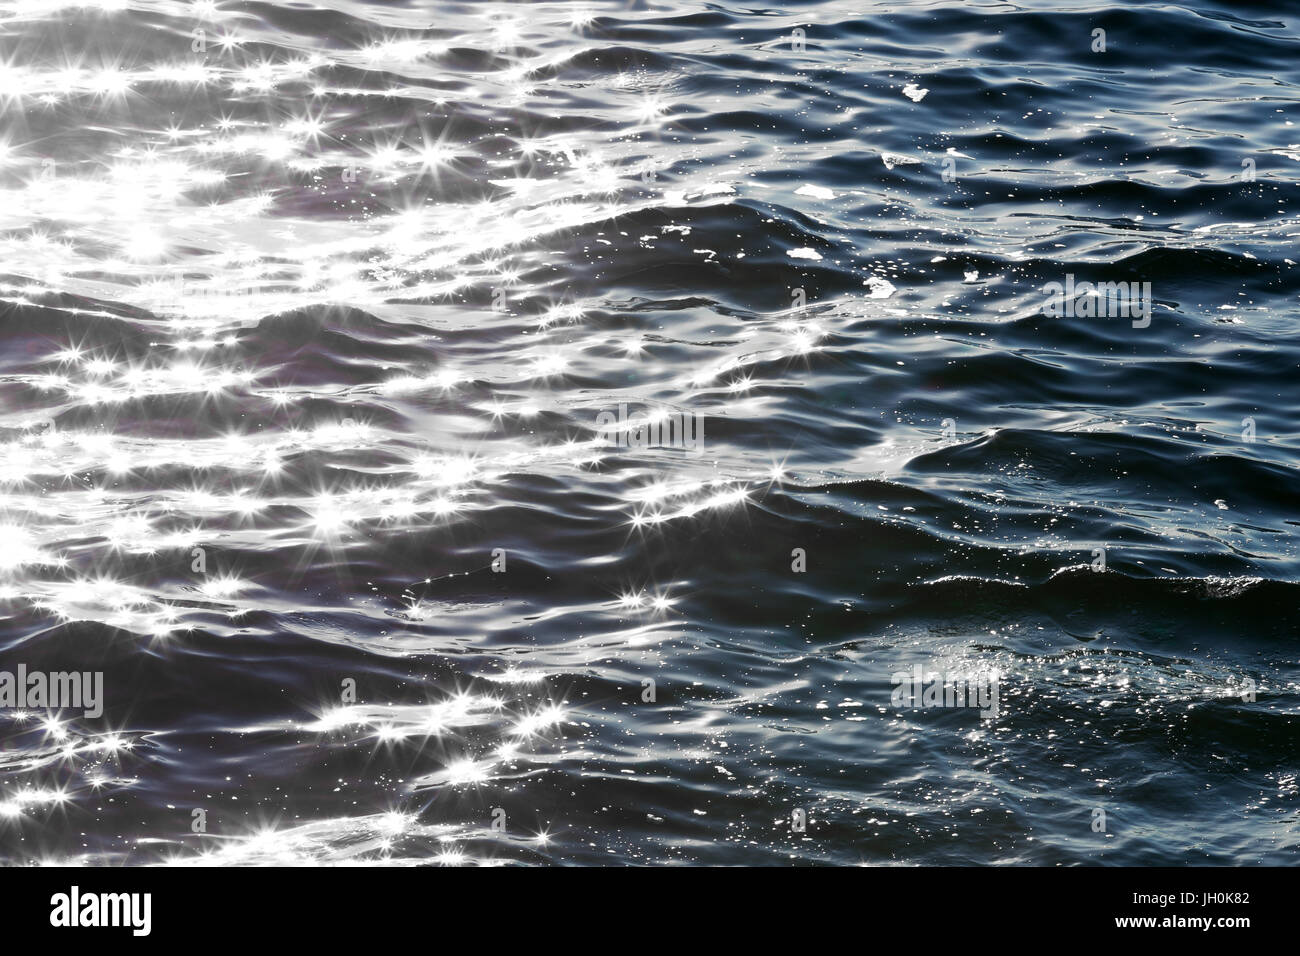 A calm ocean reflects sun stars in the morning light. Stock Photo